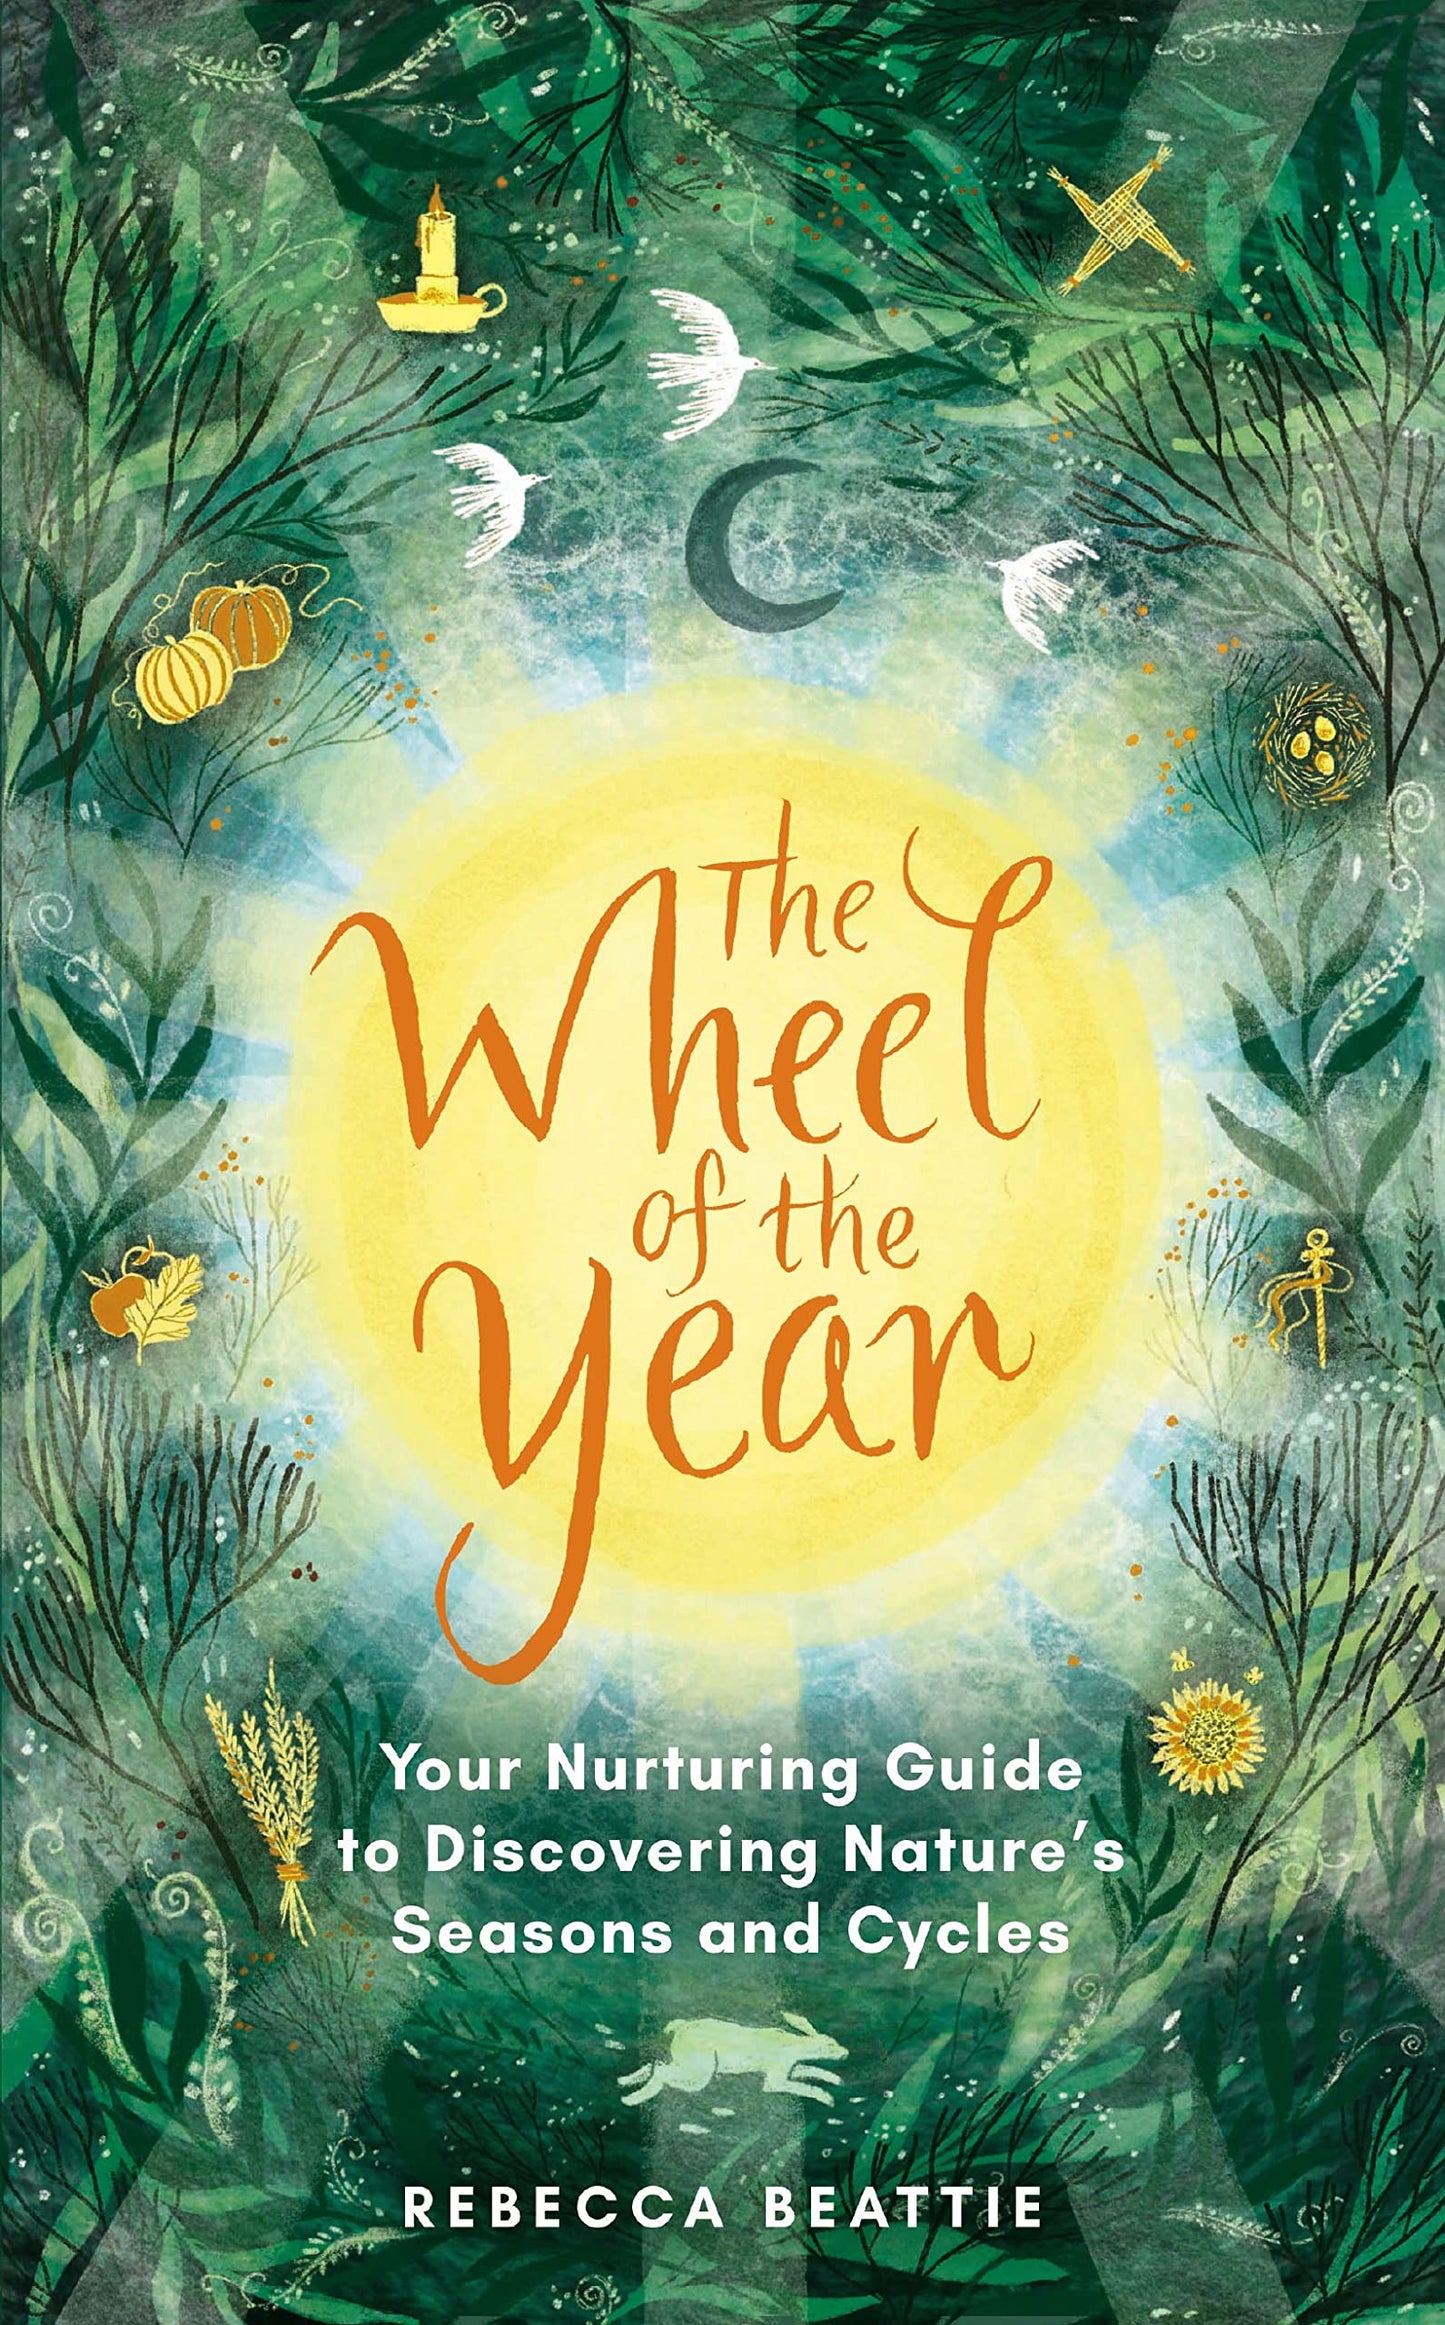 The Wheel of the Year : A Nurturing Guide to Rediscovering Nature's Seasons and Cycles